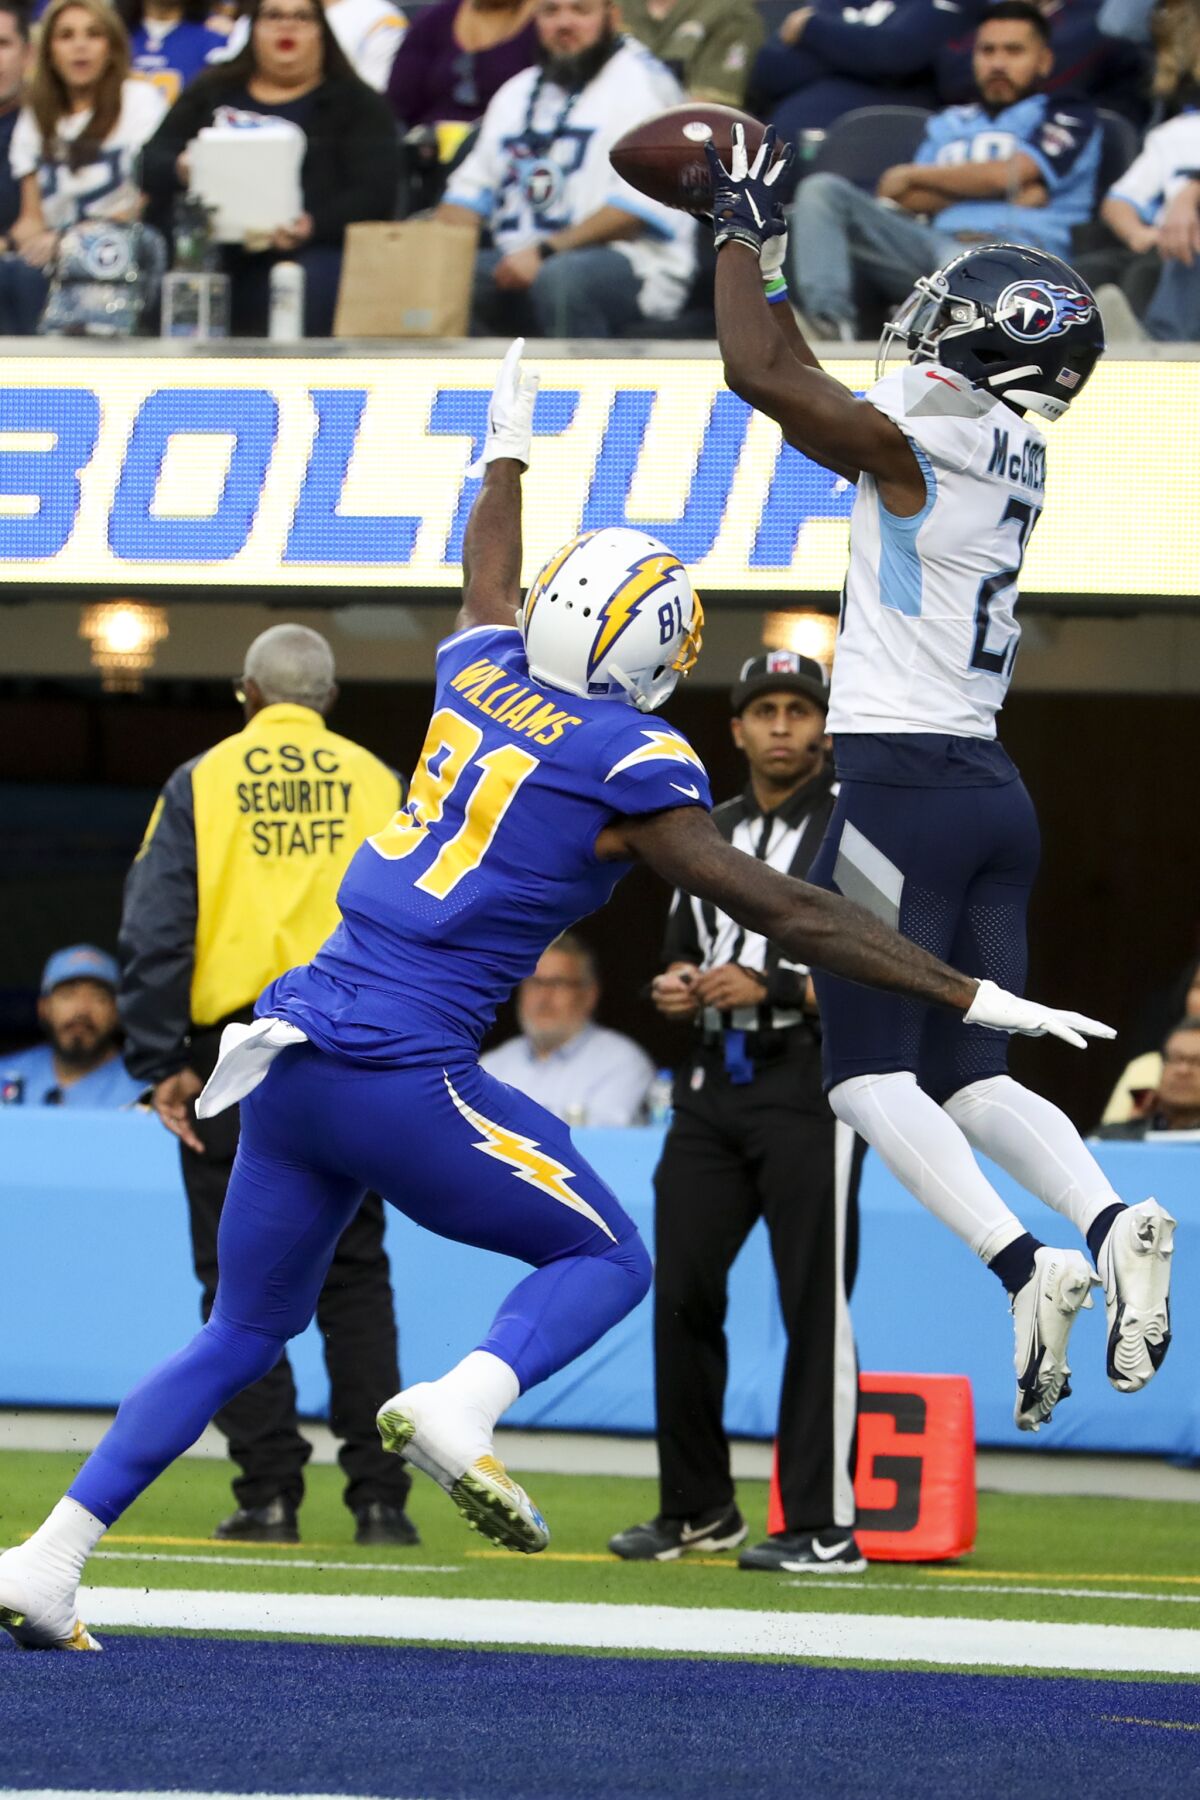 Roger McCreary laterals this pass intended for the Chargers Mike Williams to Joshua Kalu for a Titans interception.